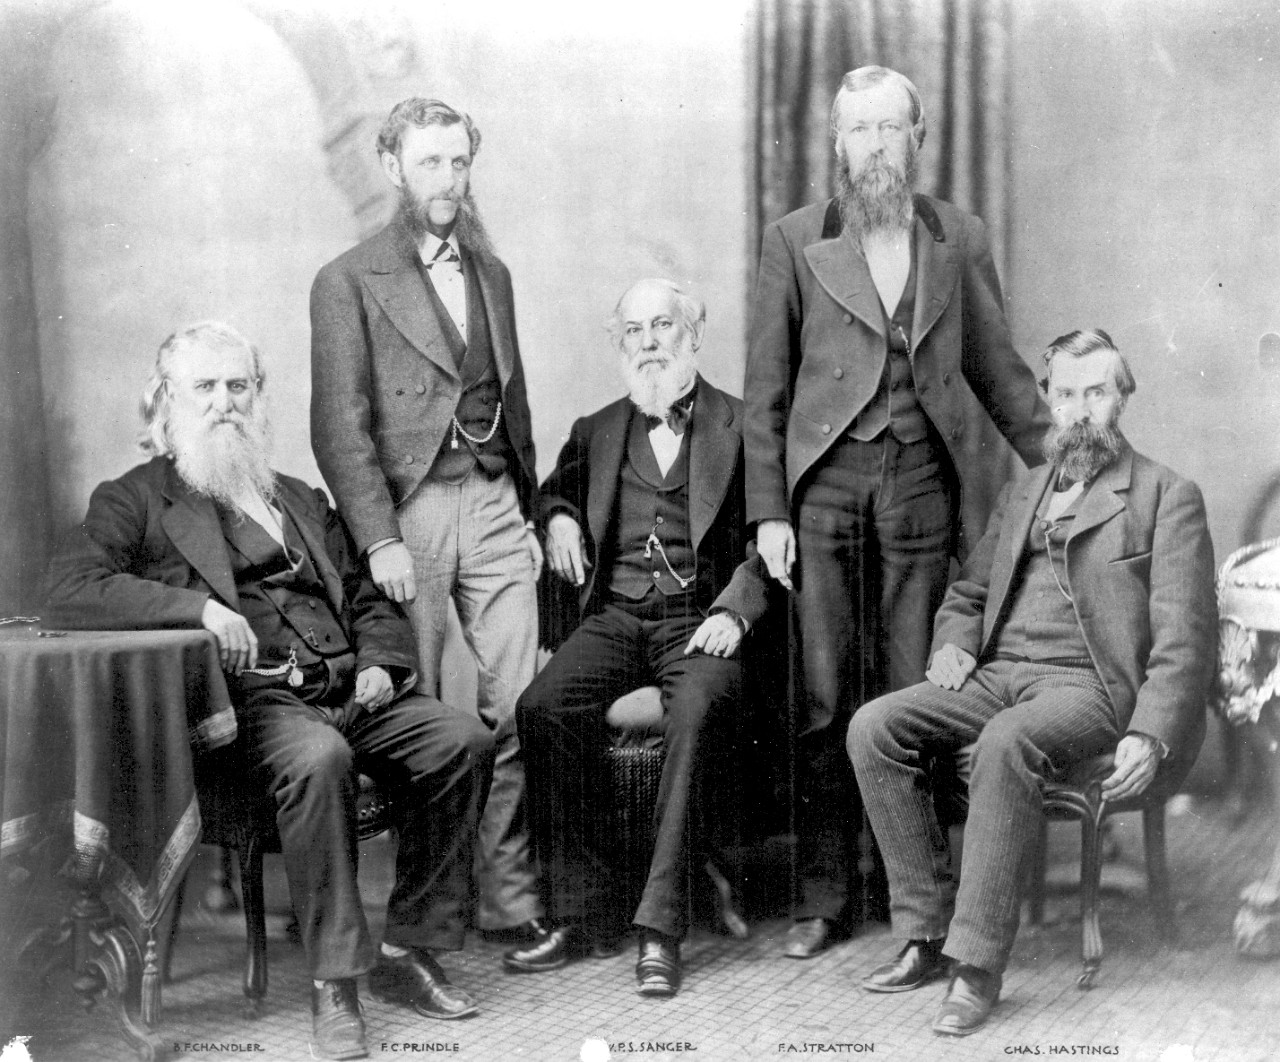 The first Navy Civil Engineer Corps officers: B.F. Chandler, F.C. Prindle, W.P.S. Sanger, F.A. Hastings, and Charles Hastings, c. 1860s. The Navy created the Civil Engineer Corps on March 2, 1867. The original duties of the Civil Engineer Corps included the charge, erection and repair of all buildings, docks, and wharves; supervising the architect, and directing all masters and other workers involved in building public works. Civil Engineer Corps officers were not required to wear a navy uniform until 1881 when the leaf insignia was created. 